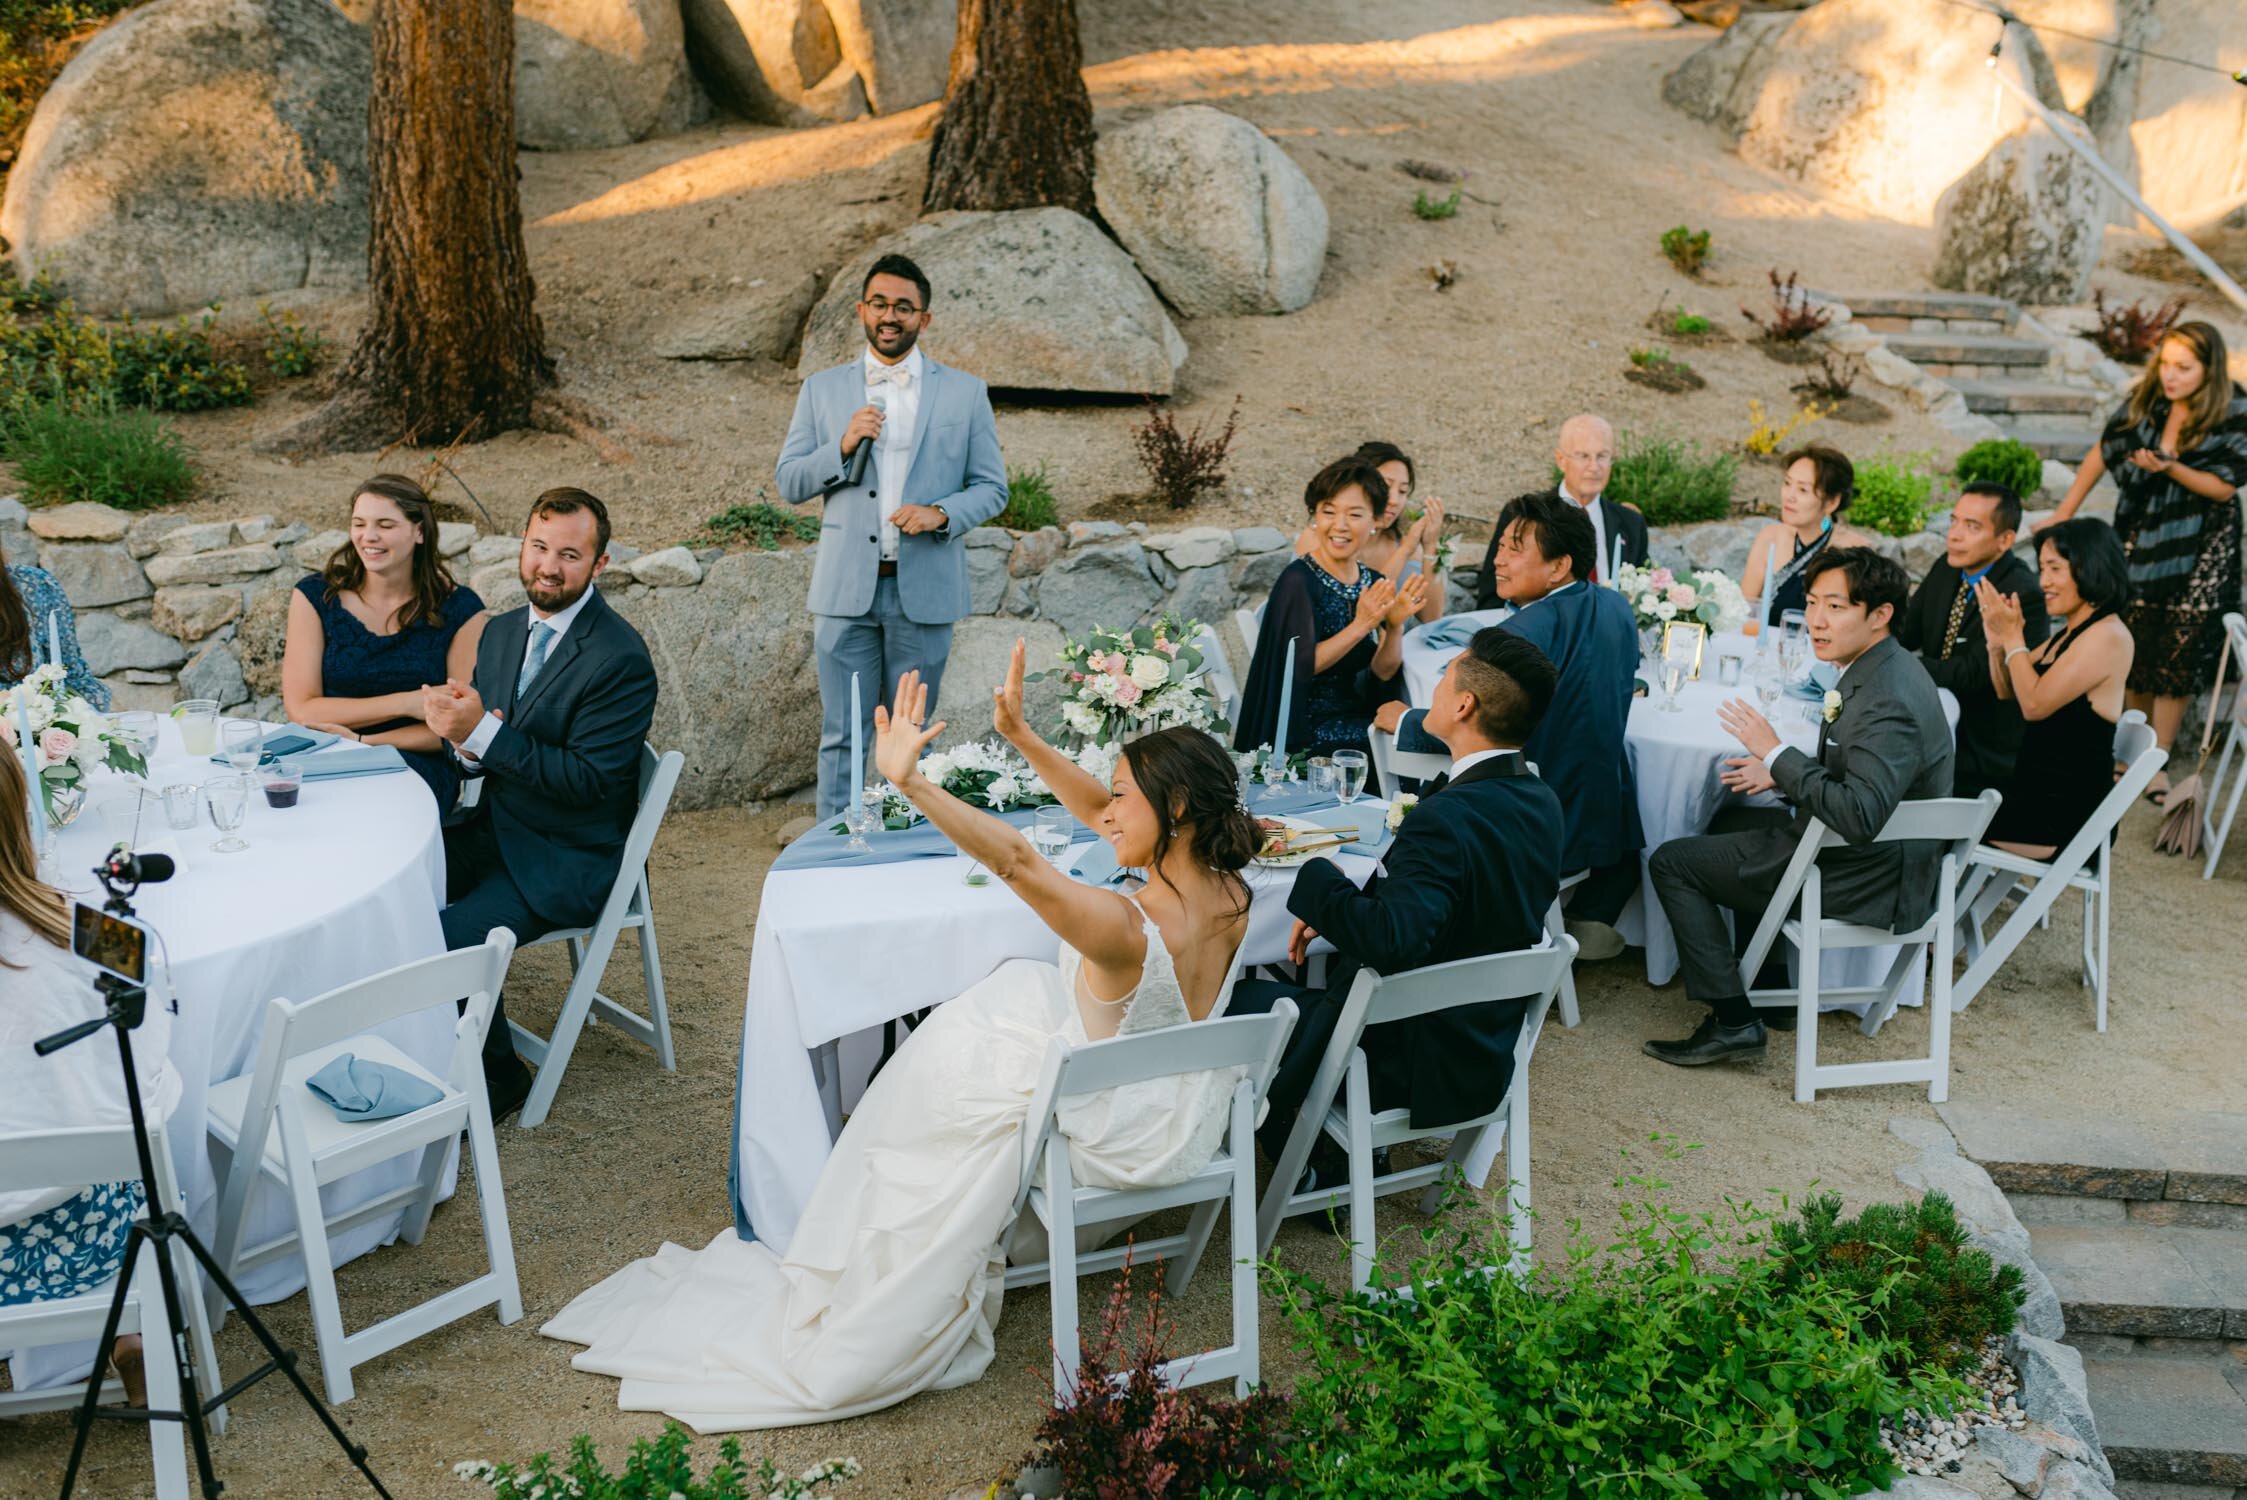 Tahoe Blue estate wedding photography, photo of couple during their toasts